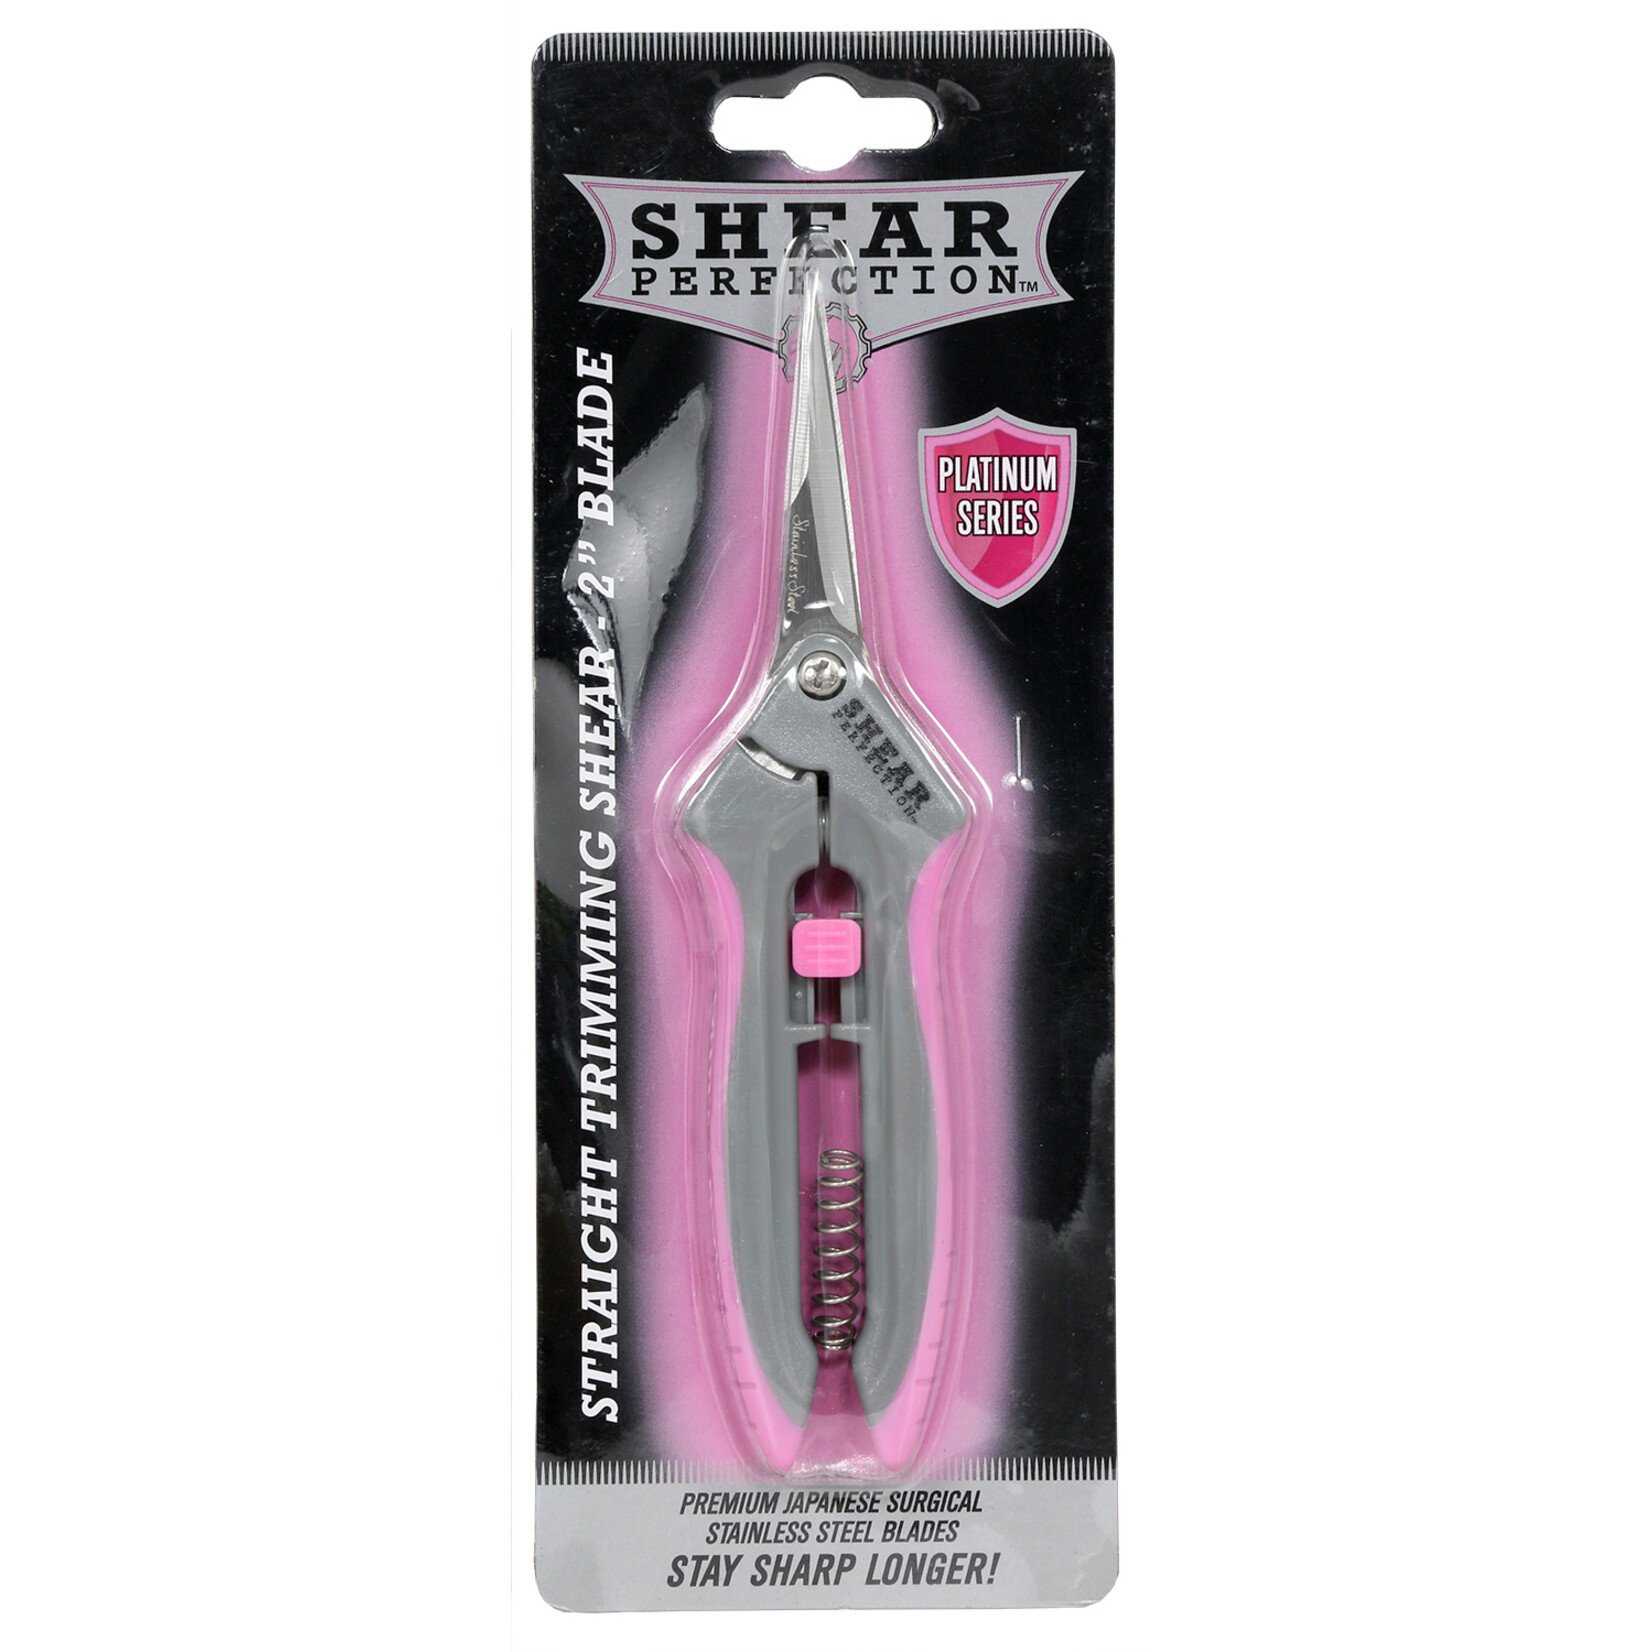 Shear Perfection Shear Perfection Pink Platinum Stainless Trim Shears -2 Straight Blades